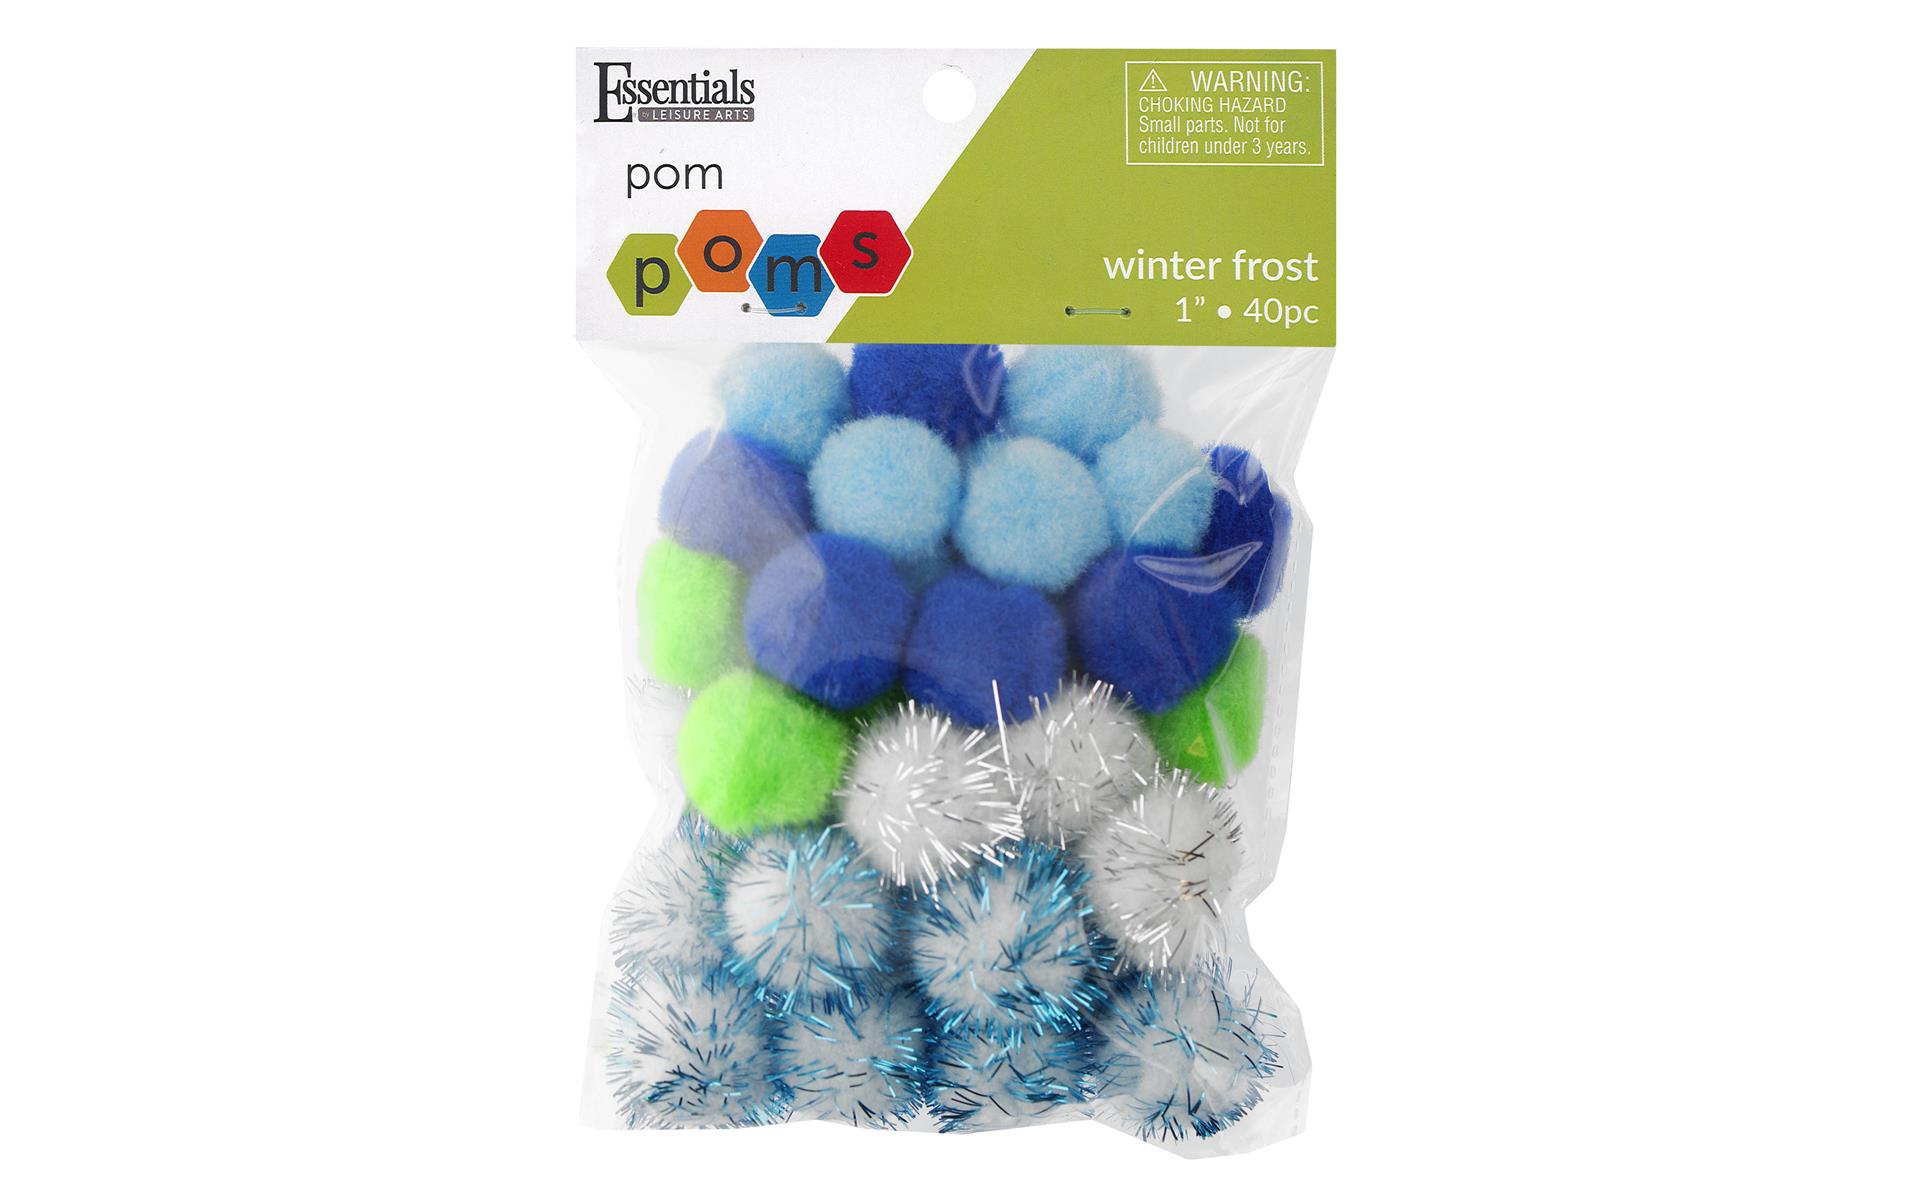 Essentials by Leisure Arts Pom Poms - Winter Frost -1 - 40 piece pom poms  arts and crafts - colored pompoms for crafts - craft pom poms - puff balls  for crafts